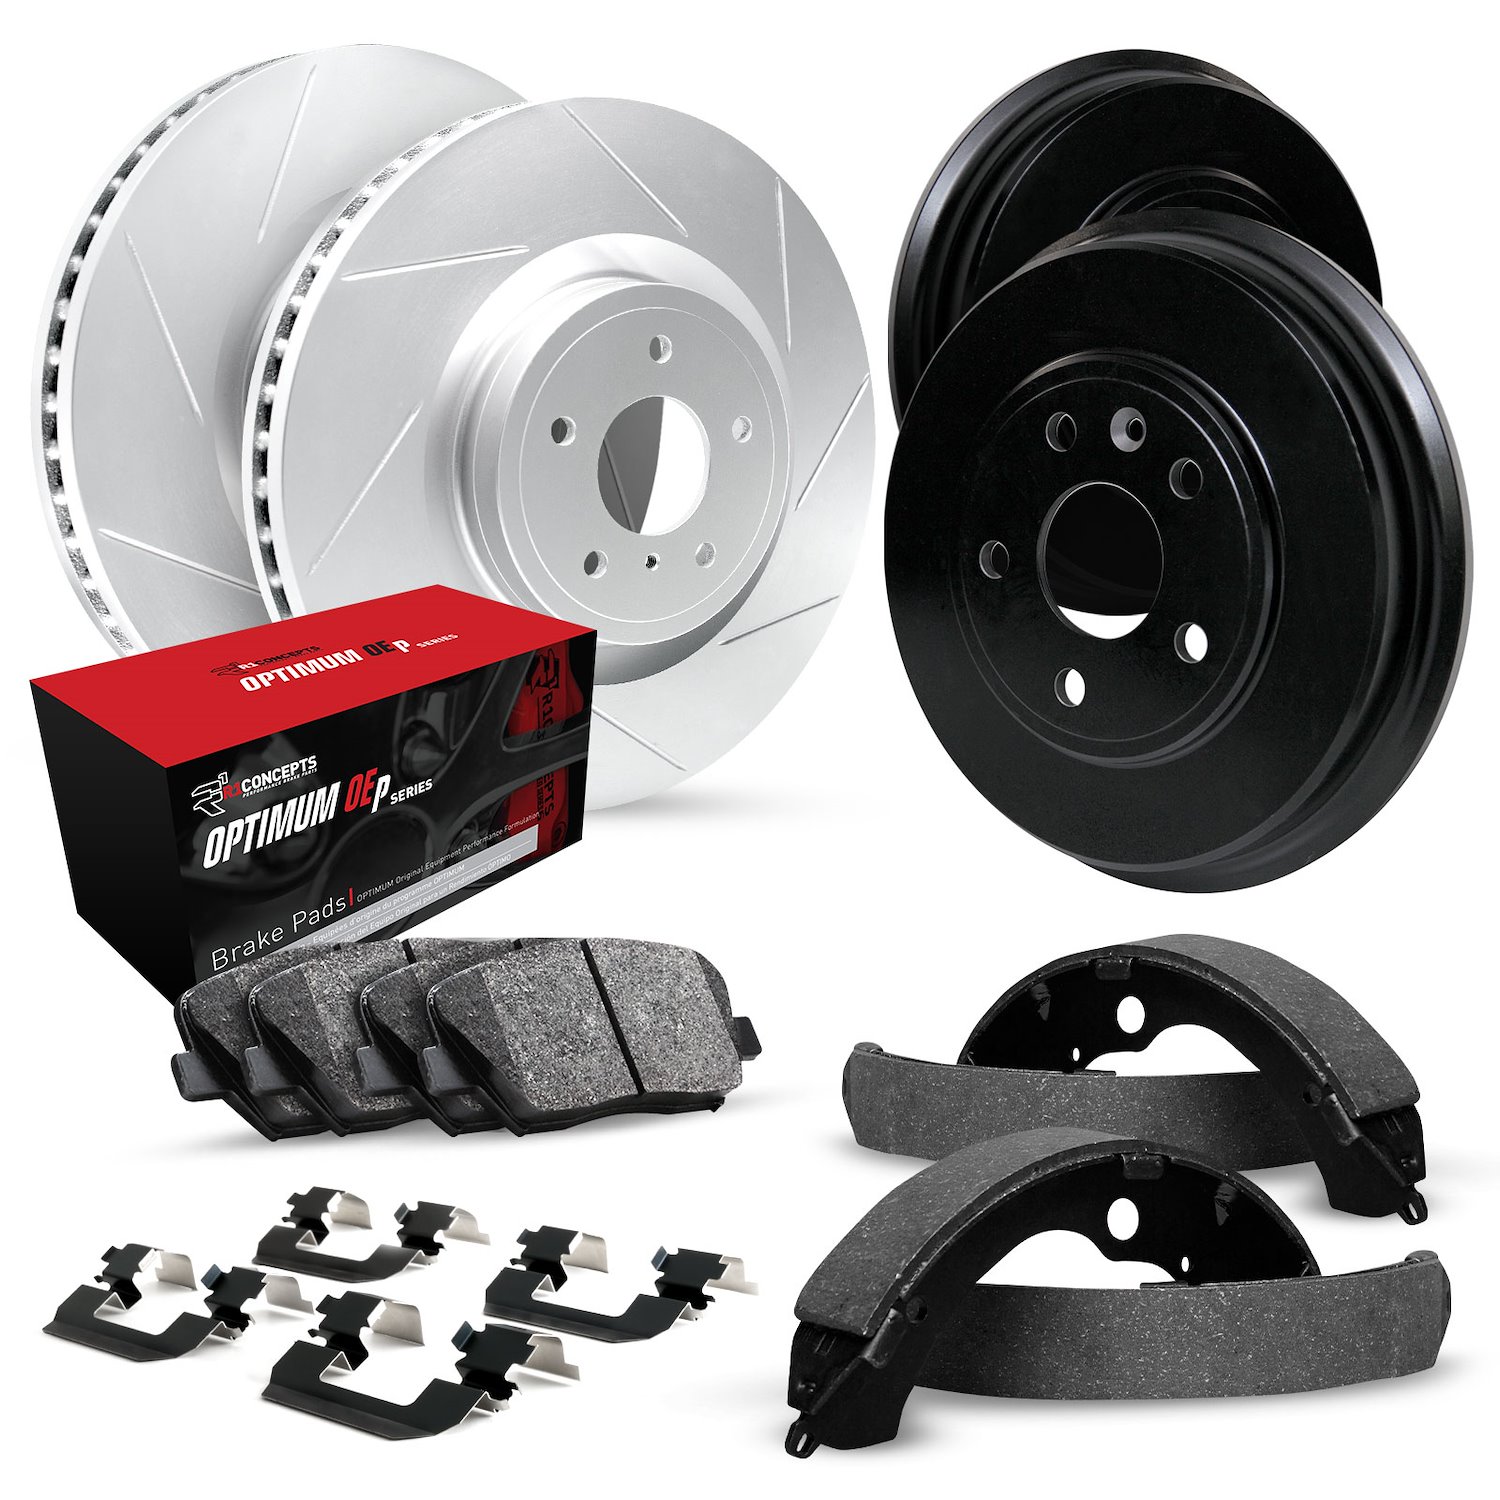 GEO-Carbon Slotted Brake Rotor & Drum Set w/Optimum OE Pads, Shoes, & Hardware, 1983-1984 GM, Position: Front & Rear